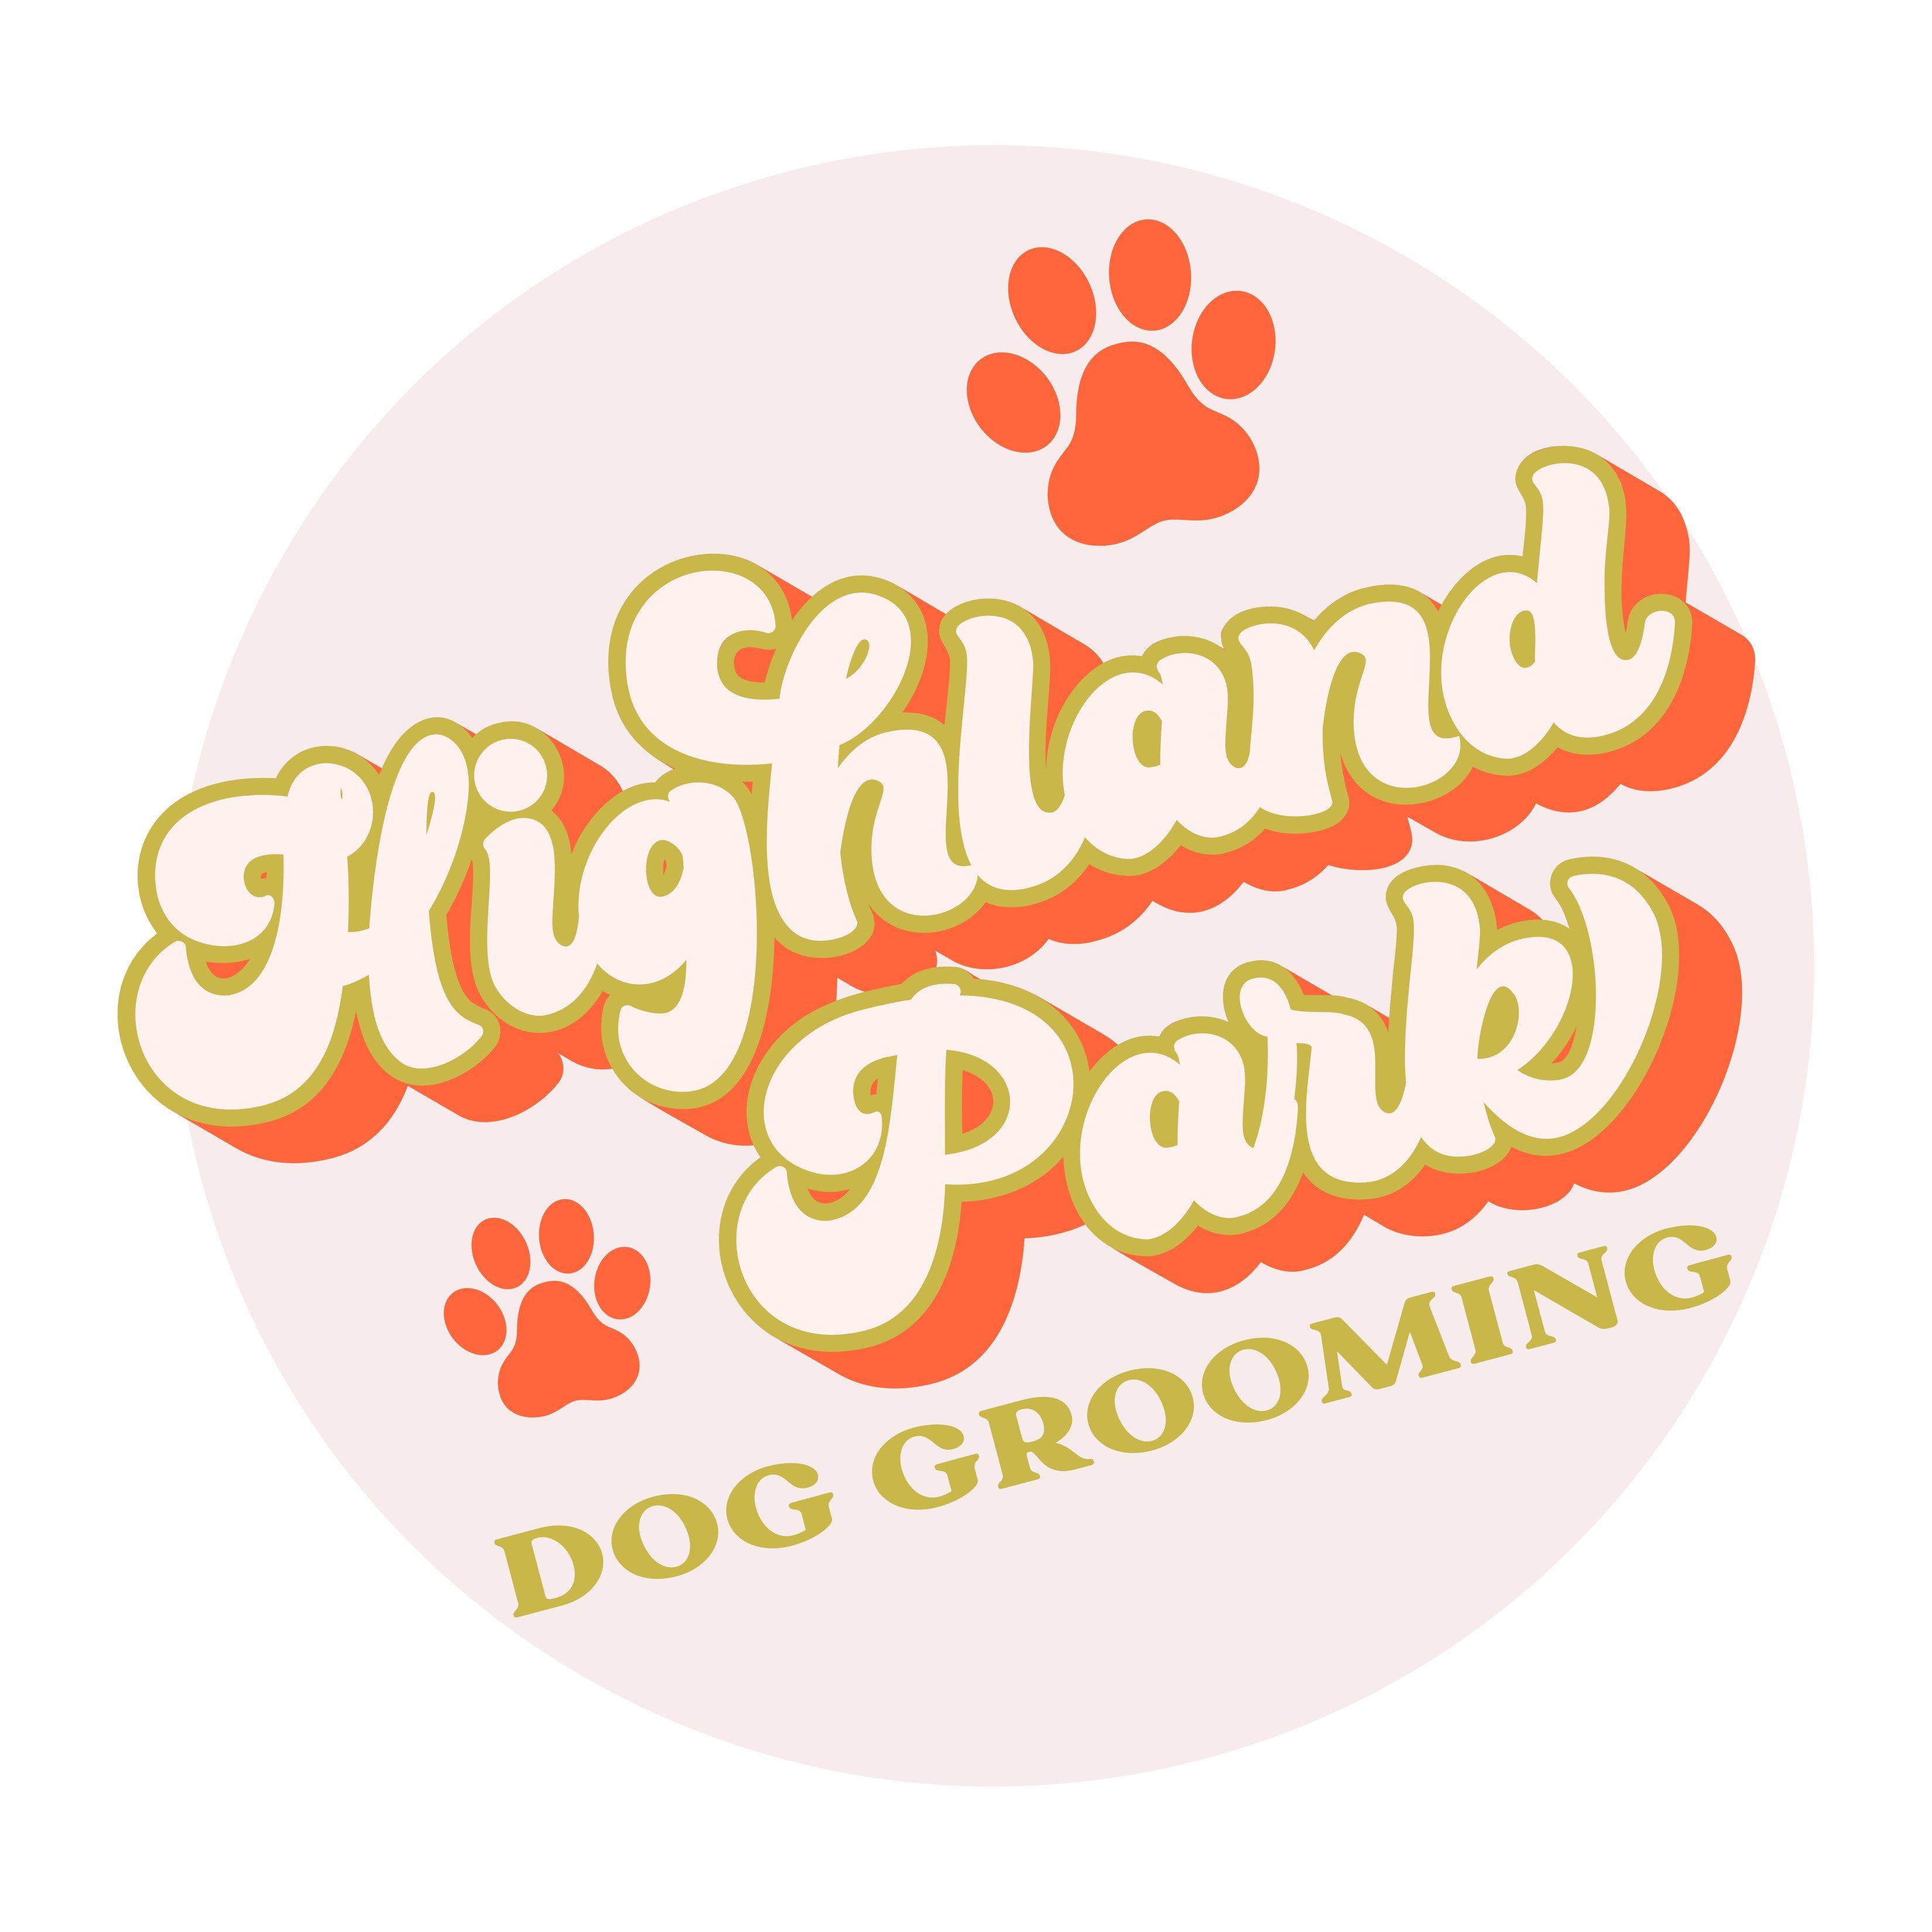 Highland Park Dog Grooming - Manchester, CT 06040 - (860)268-7187 | ShowMeLocal.com